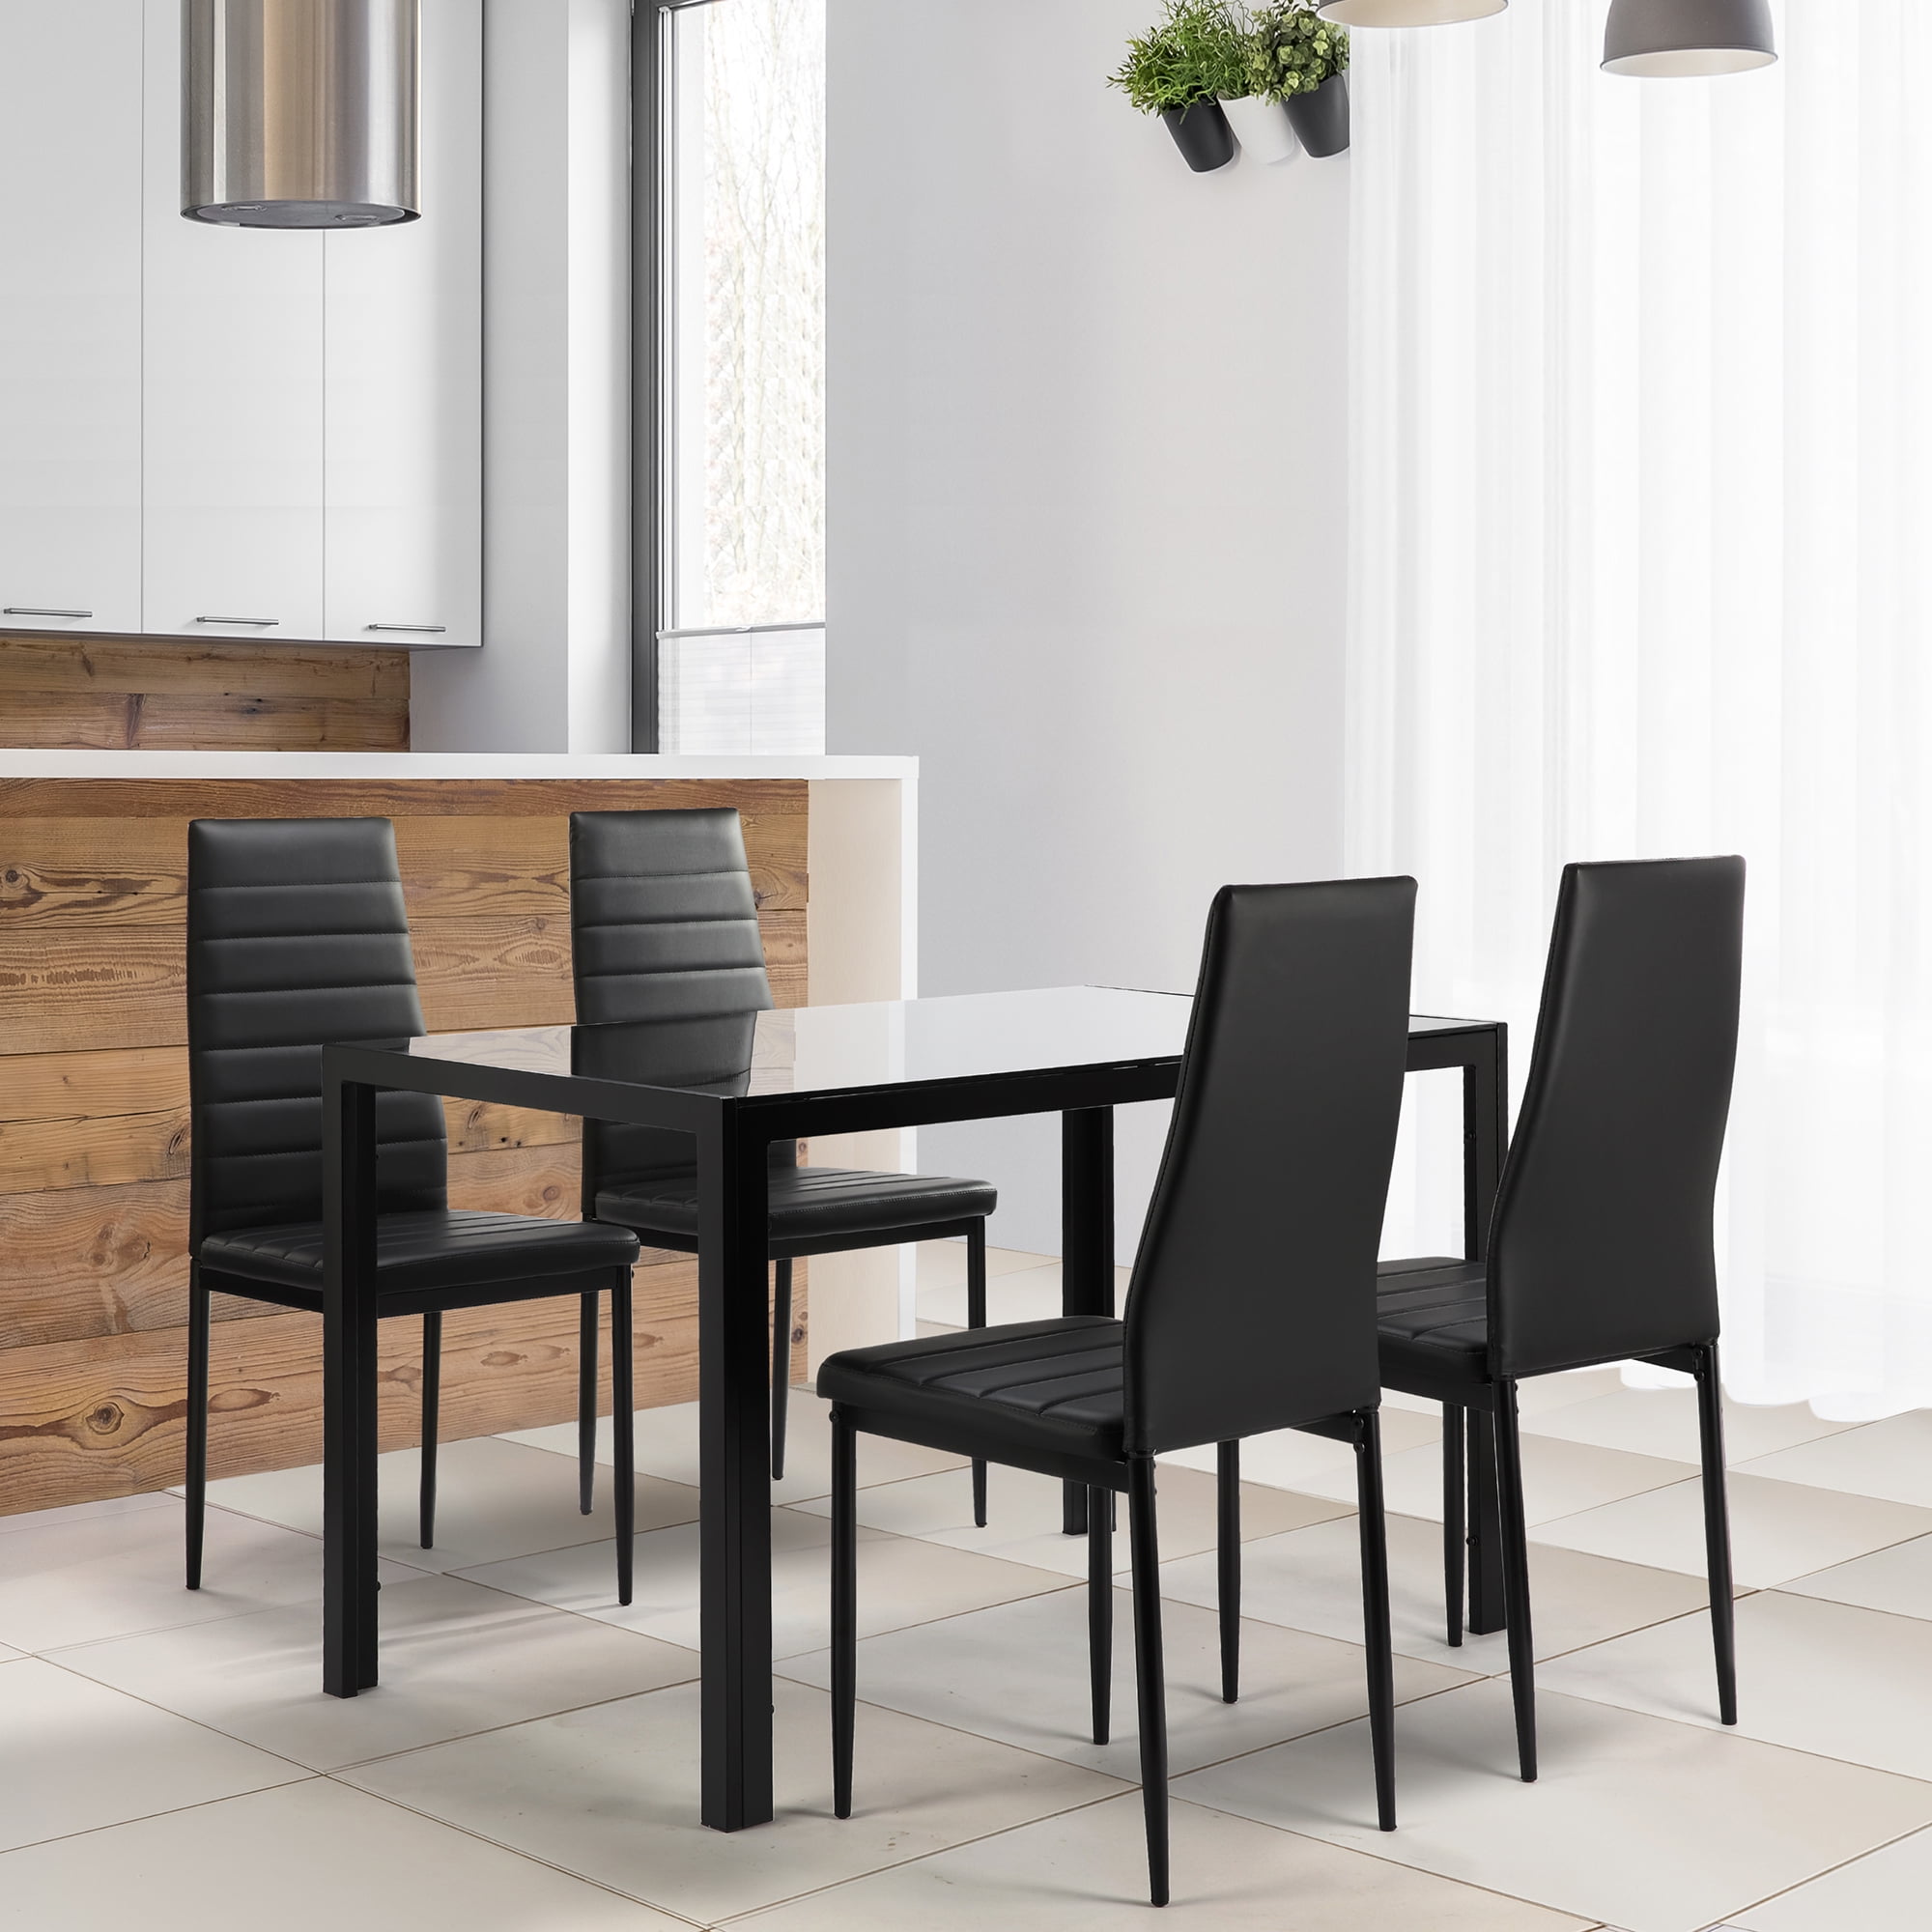 Modern 4 Black Glass Dining Room Table with 4 Velvet Chairs Set Kitchen Chairs with Comfy Upholstered Padded Seat Metal Legs for Restaurant 